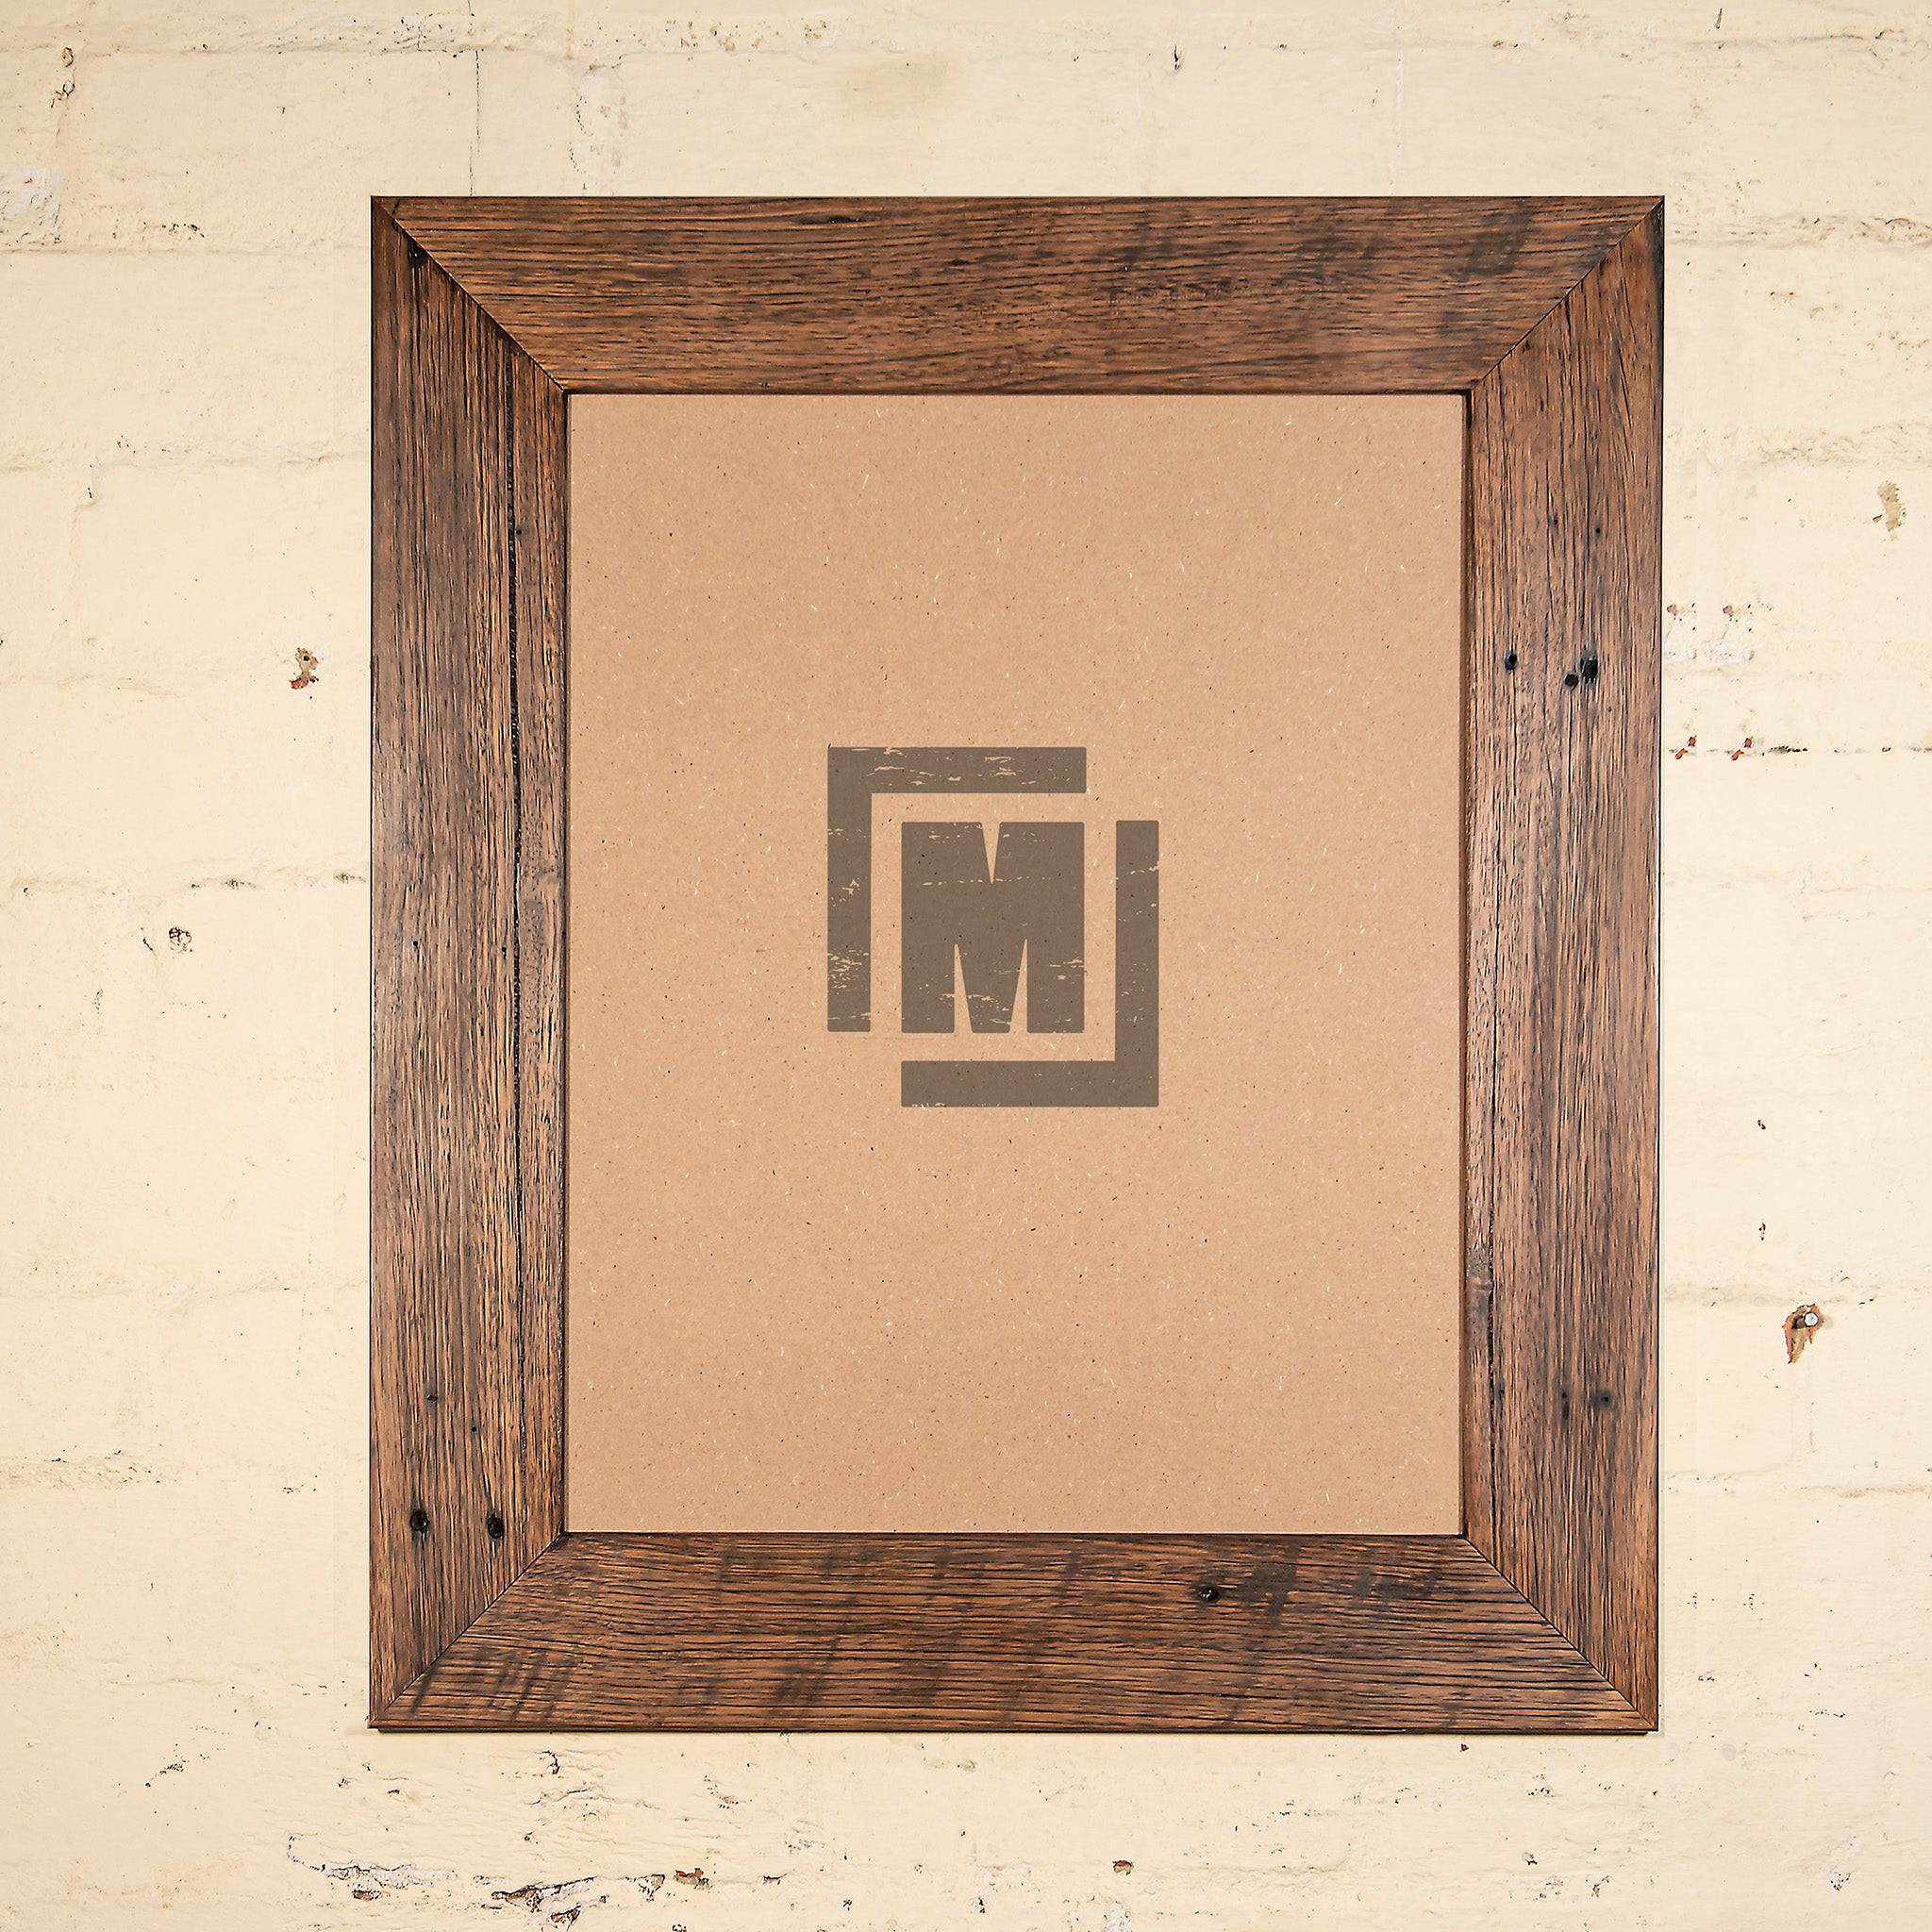 16 x 24 large, thick photo frames for art exhibtion and photography. Dark stained timber. 